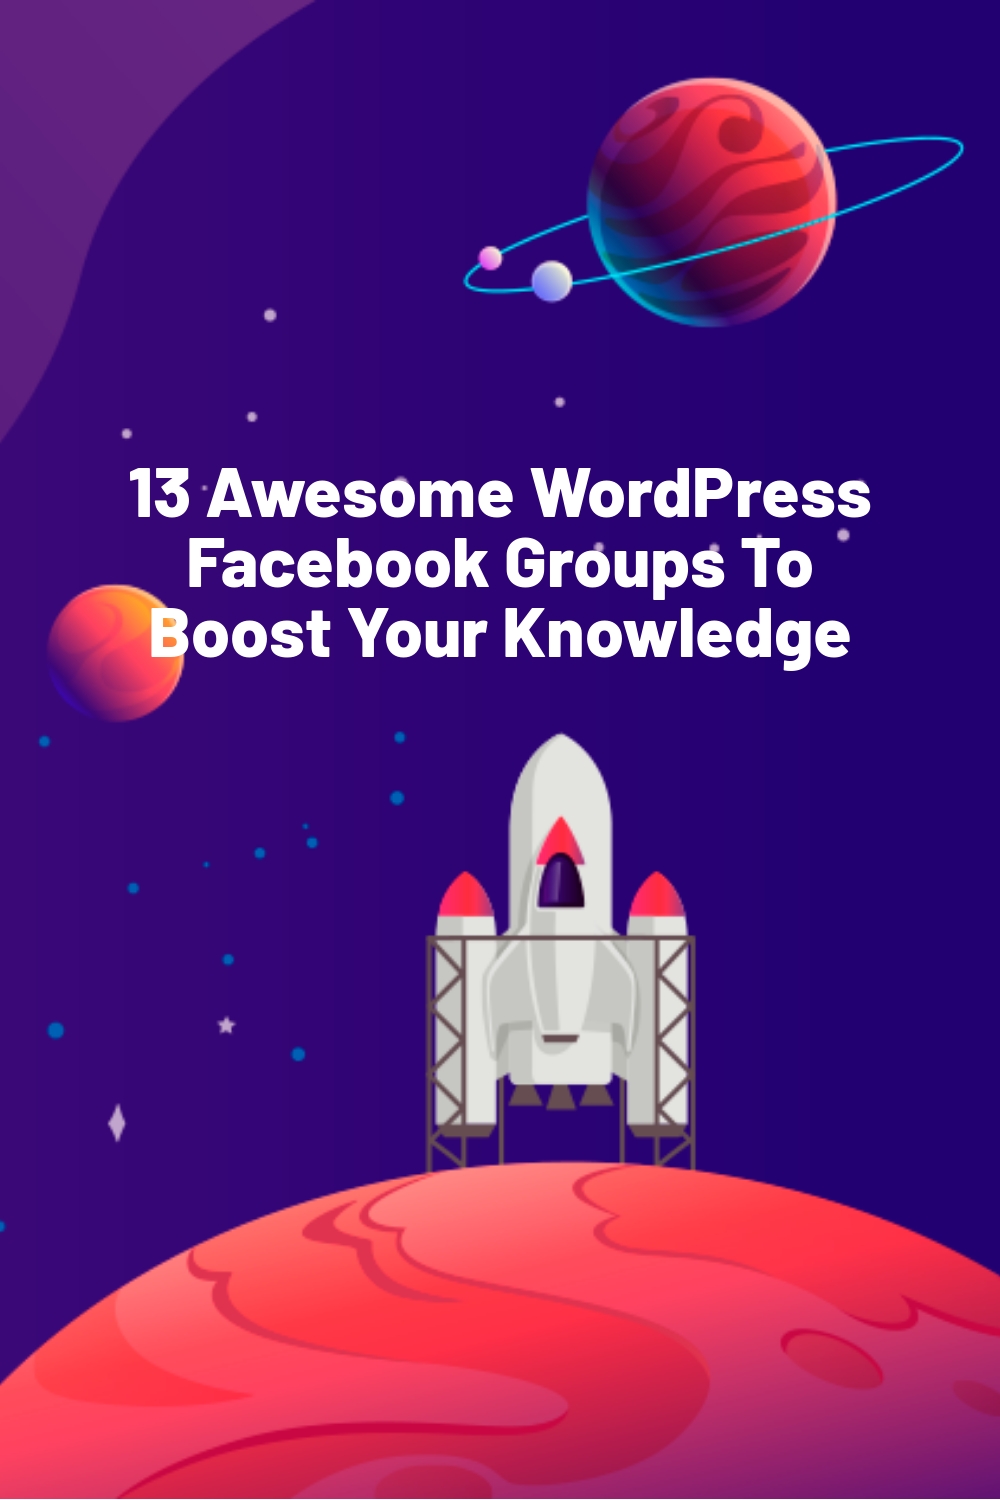 13 Awesome WordPress Facebook Groups To Boost Your Knowledge